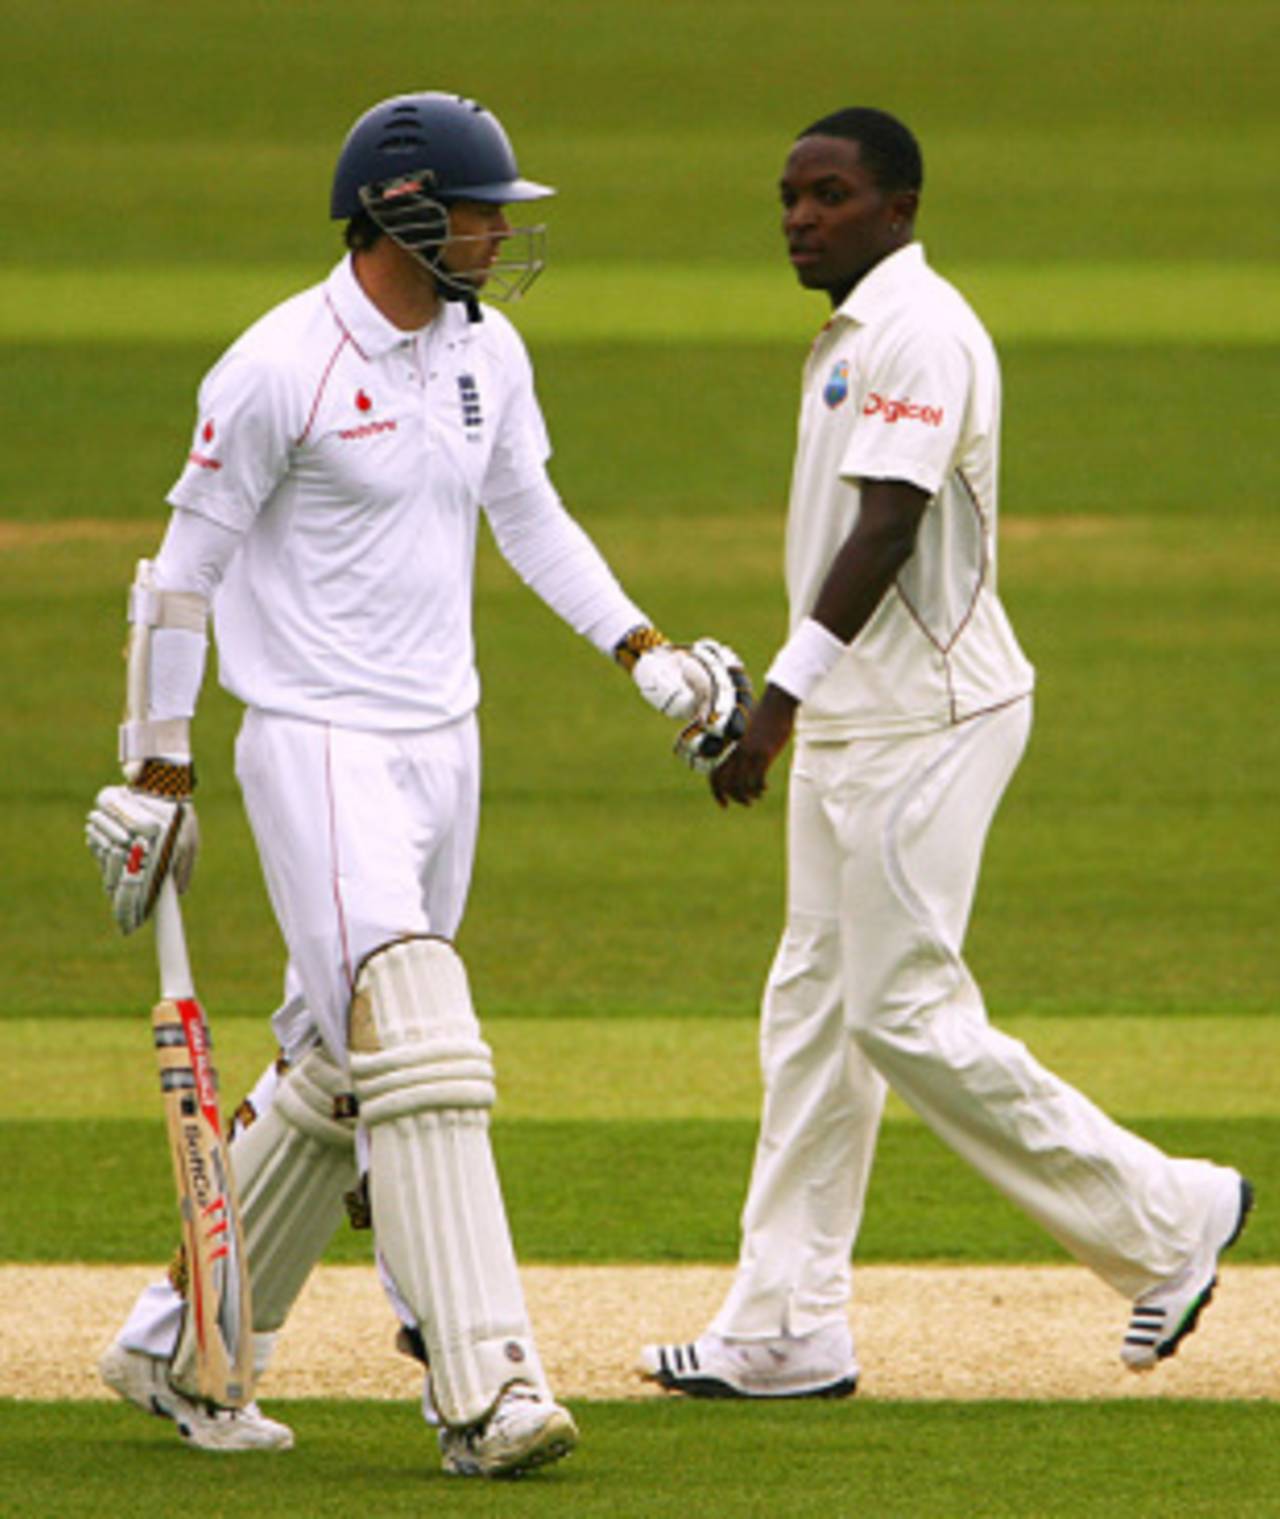 Fidel Edwards says cheerio to his old chum James Anderson, England v West Indies, 2nd Test, Chester-le-Street, May 16, 2009